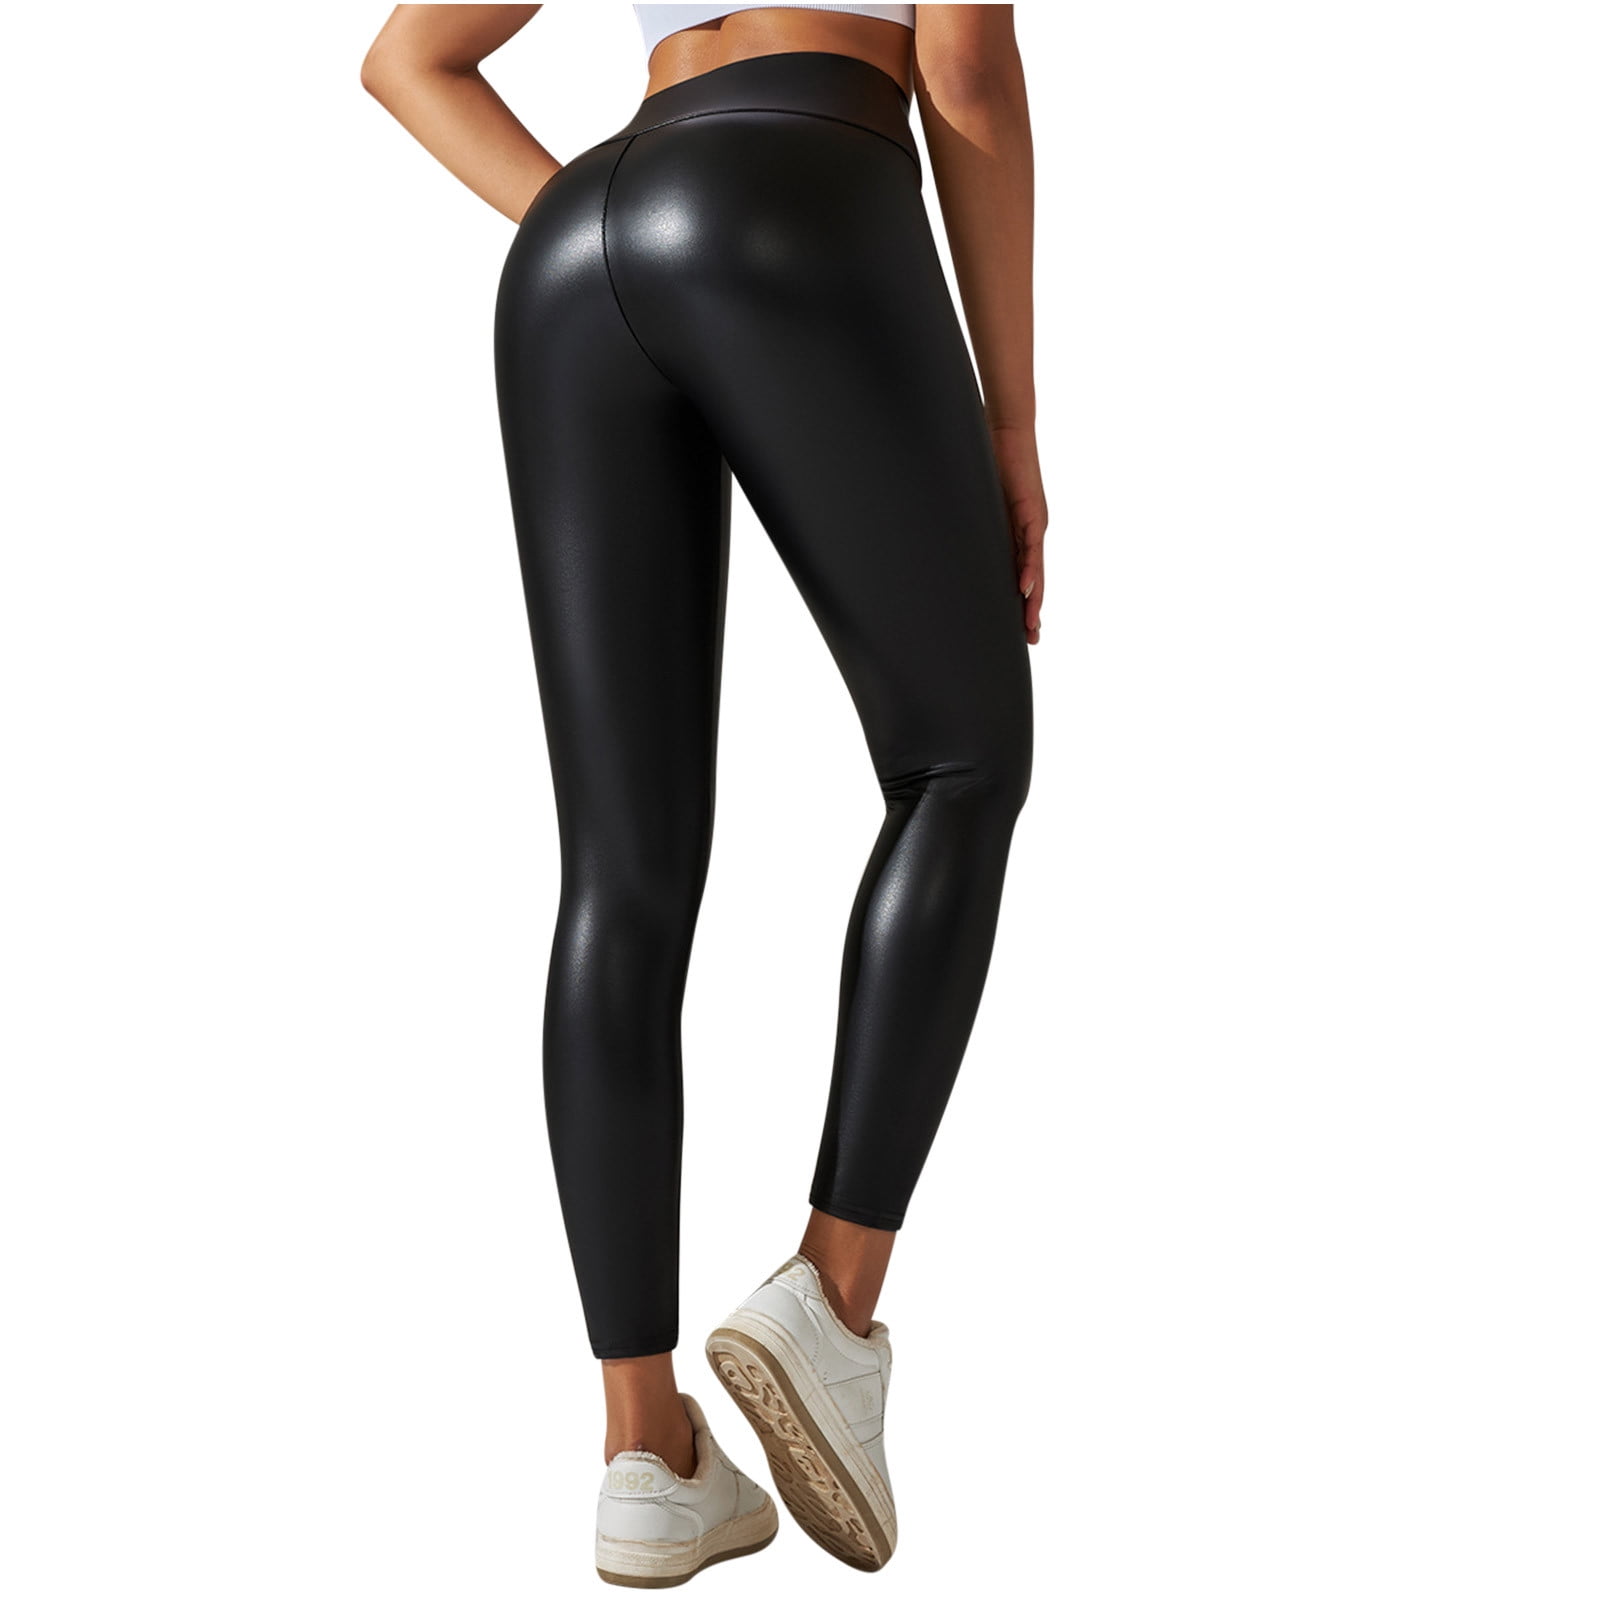 Black Faux Leather Leggings for Women High Waisted Stretch Butt Lift Fleece  Lined Pleather Pants